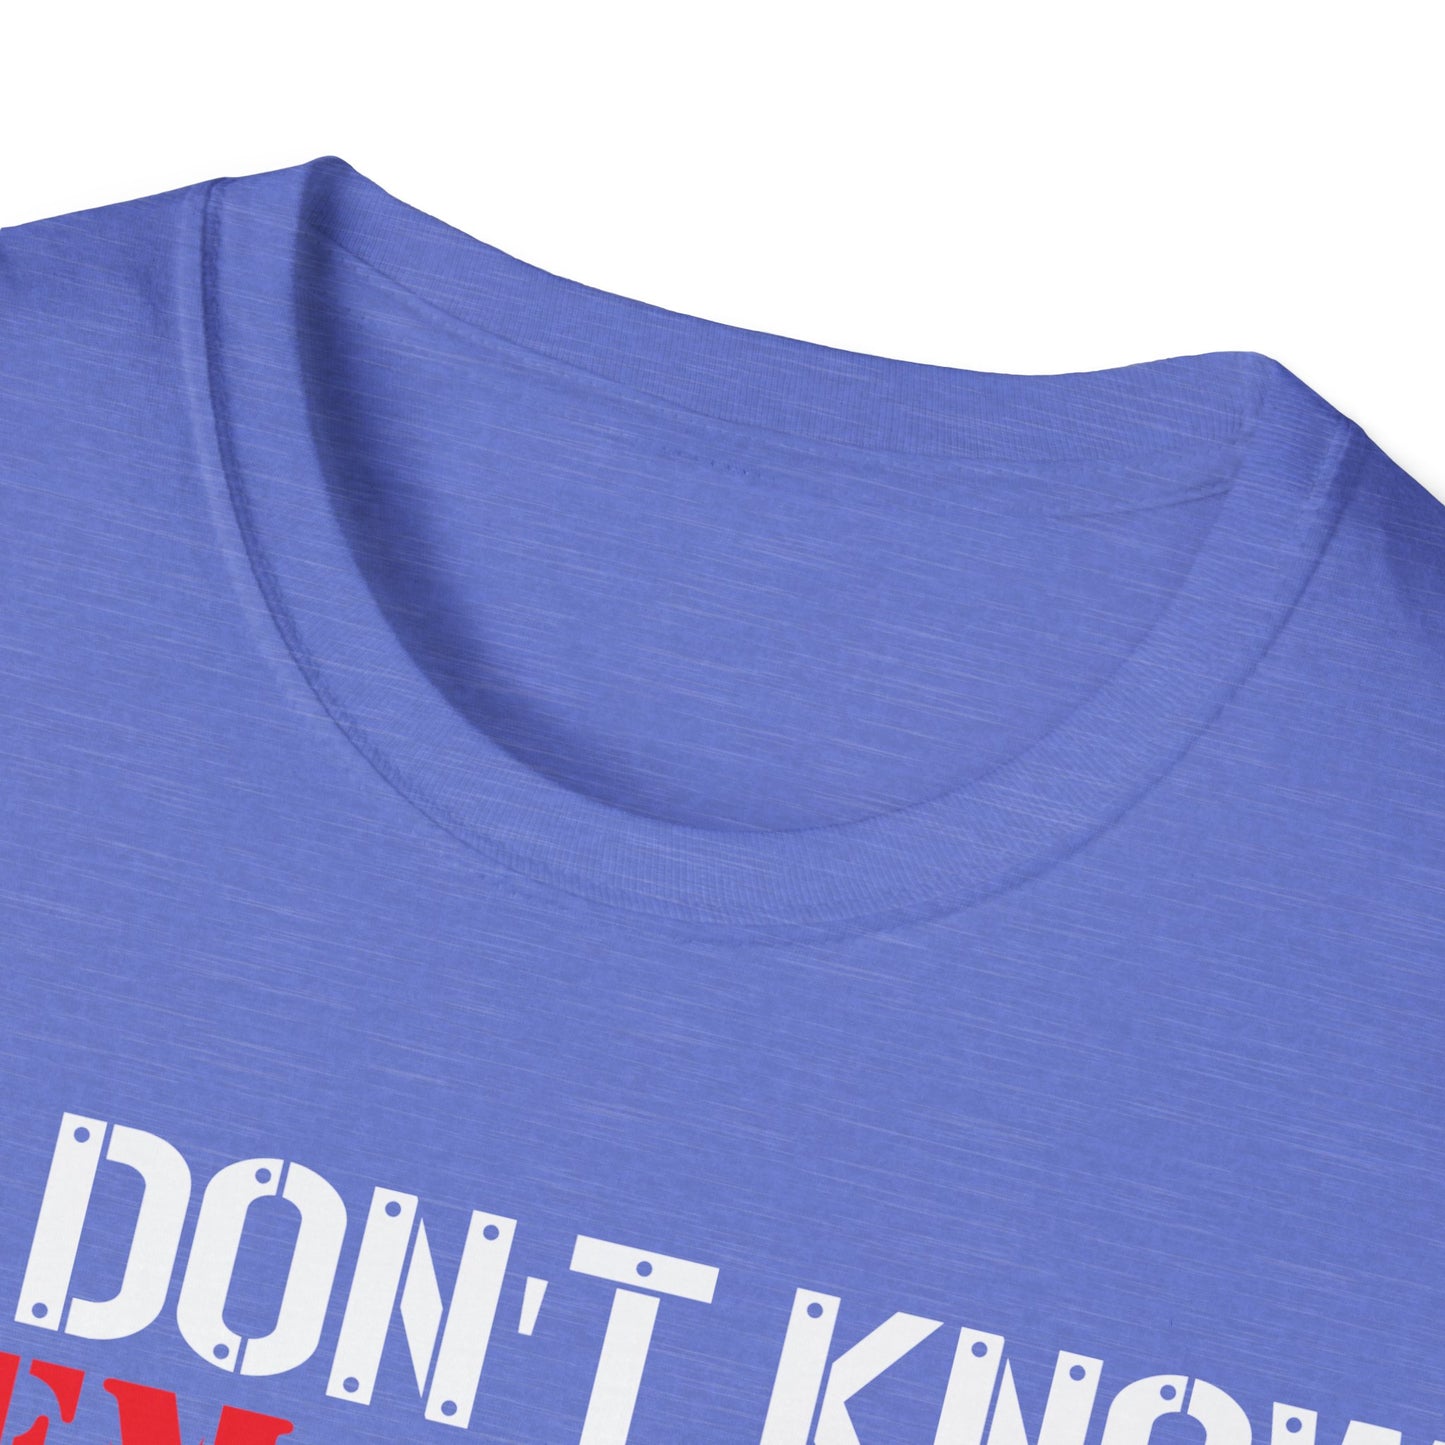 We Don't Know Them All - Unisex Softstyle T-Shirt